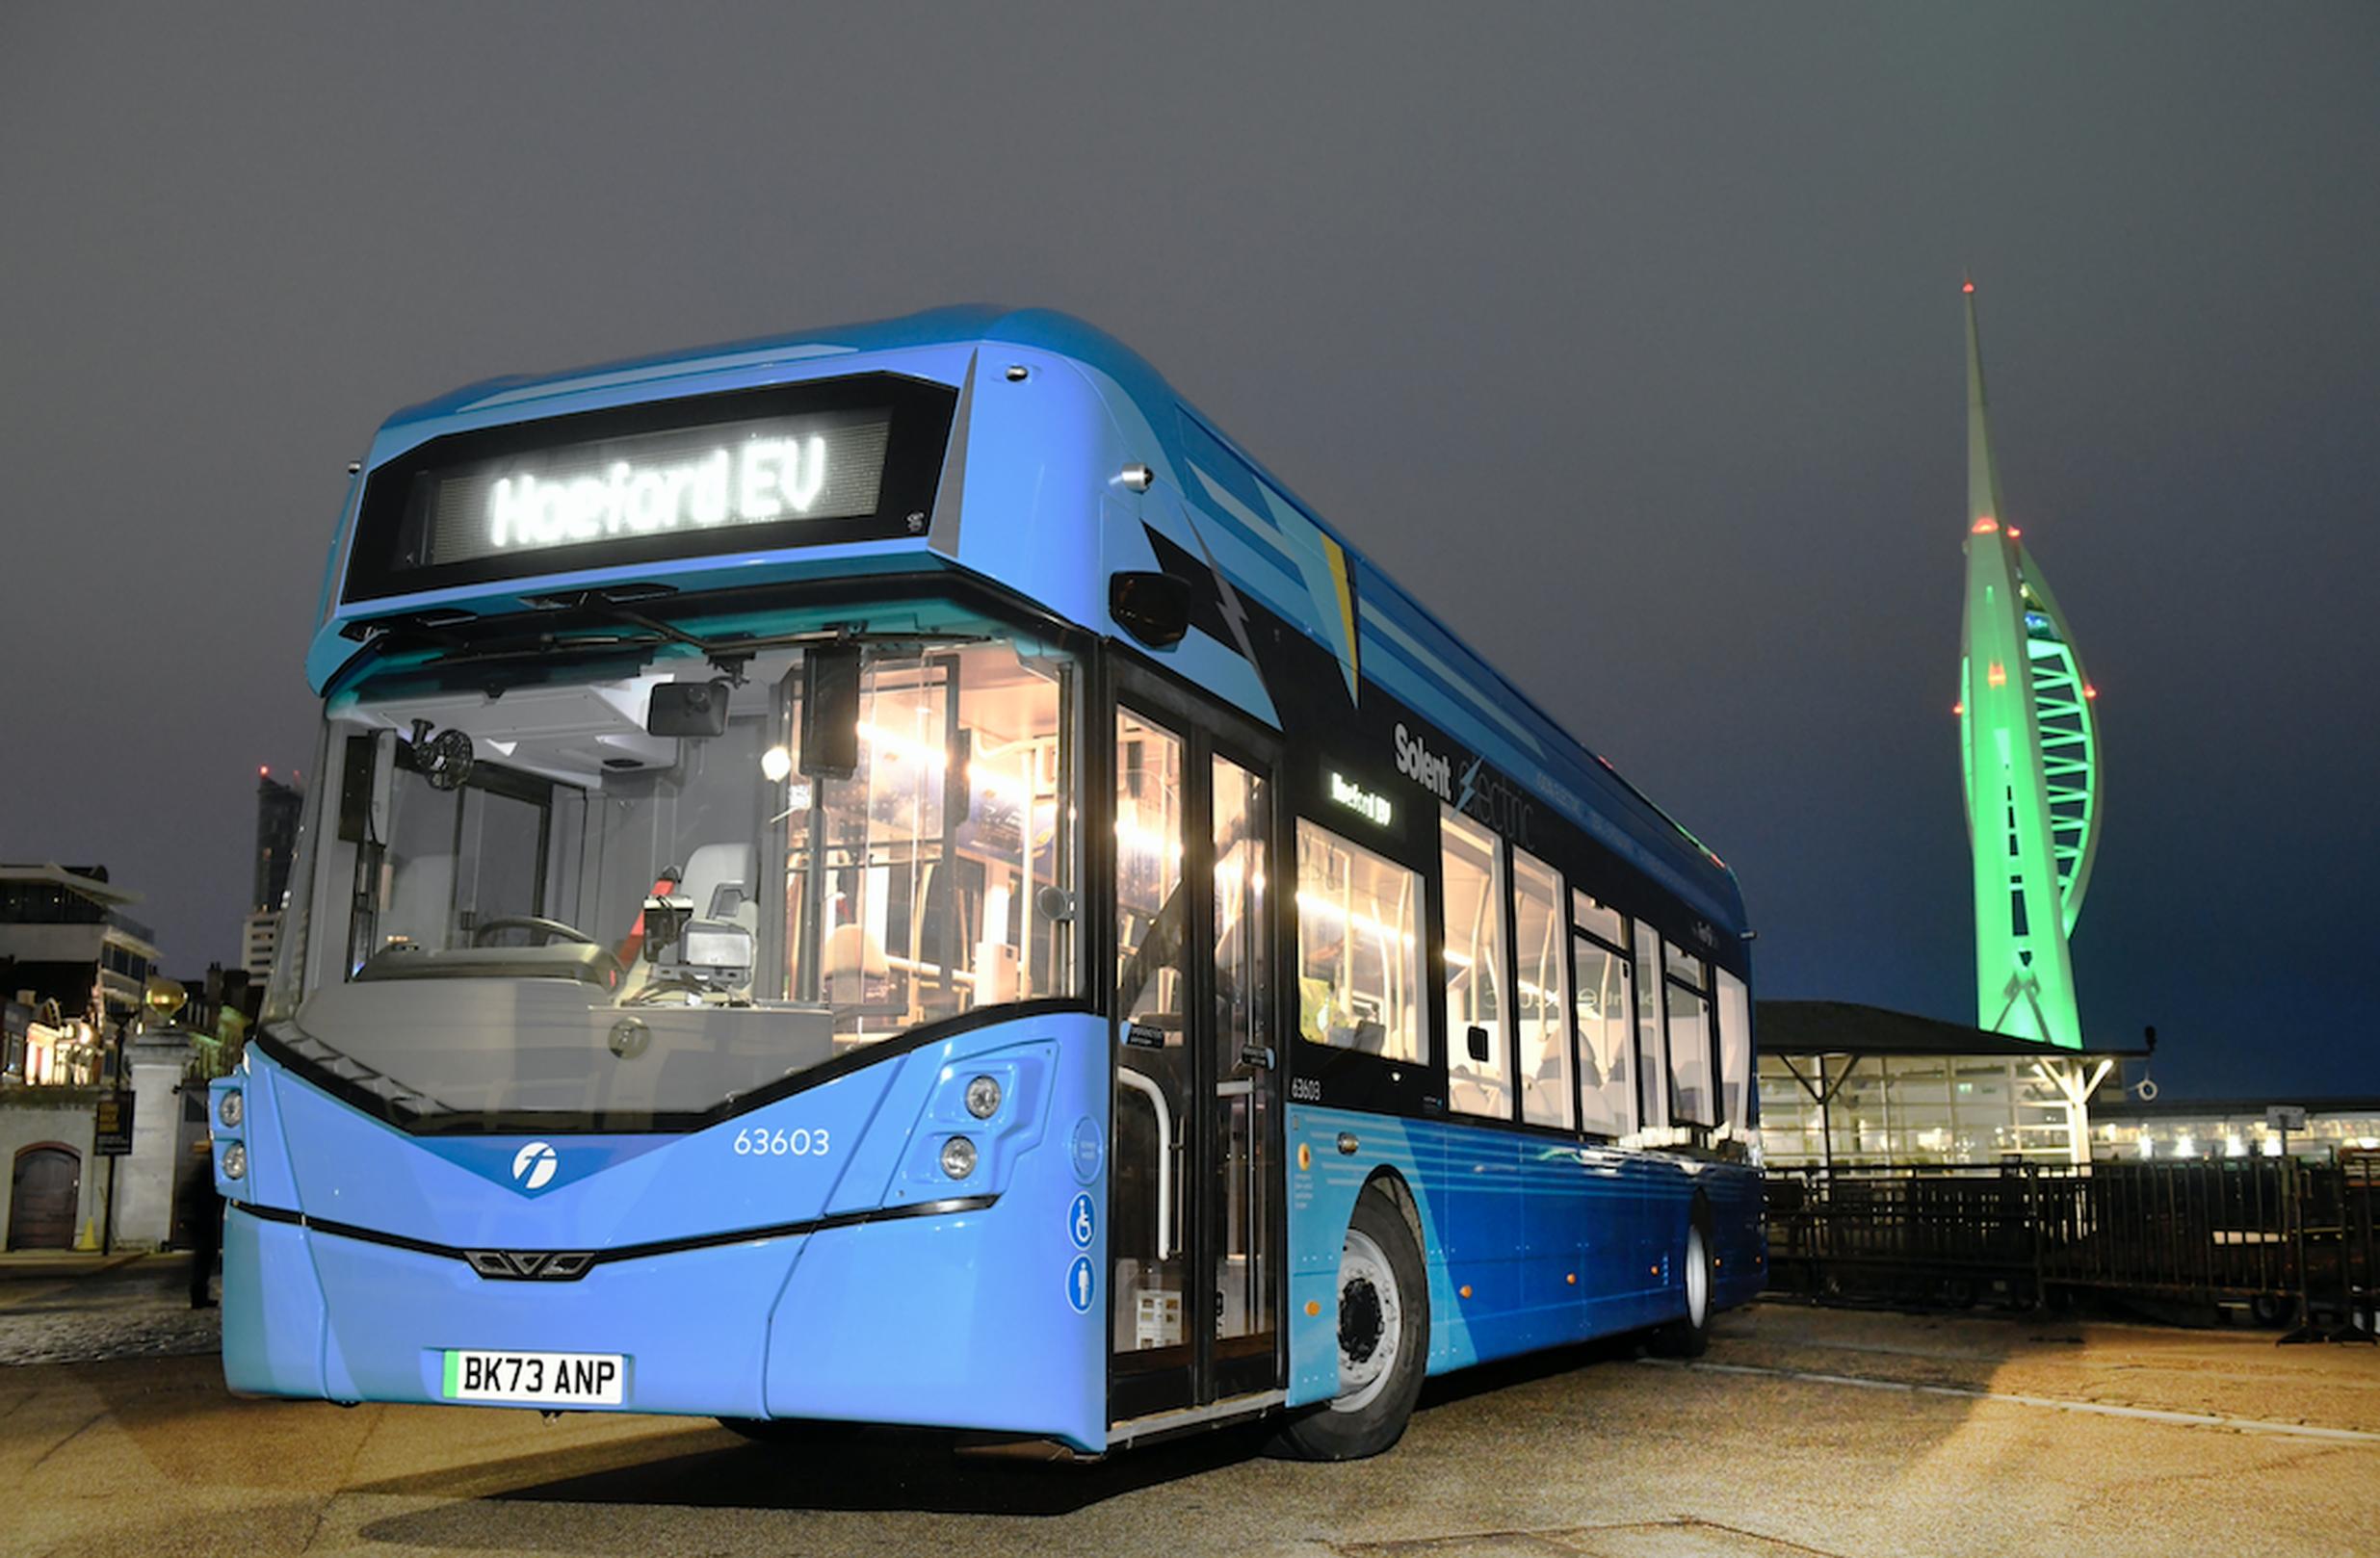 Electric buses hit the road in Portsmouth, Fareham and Gosport